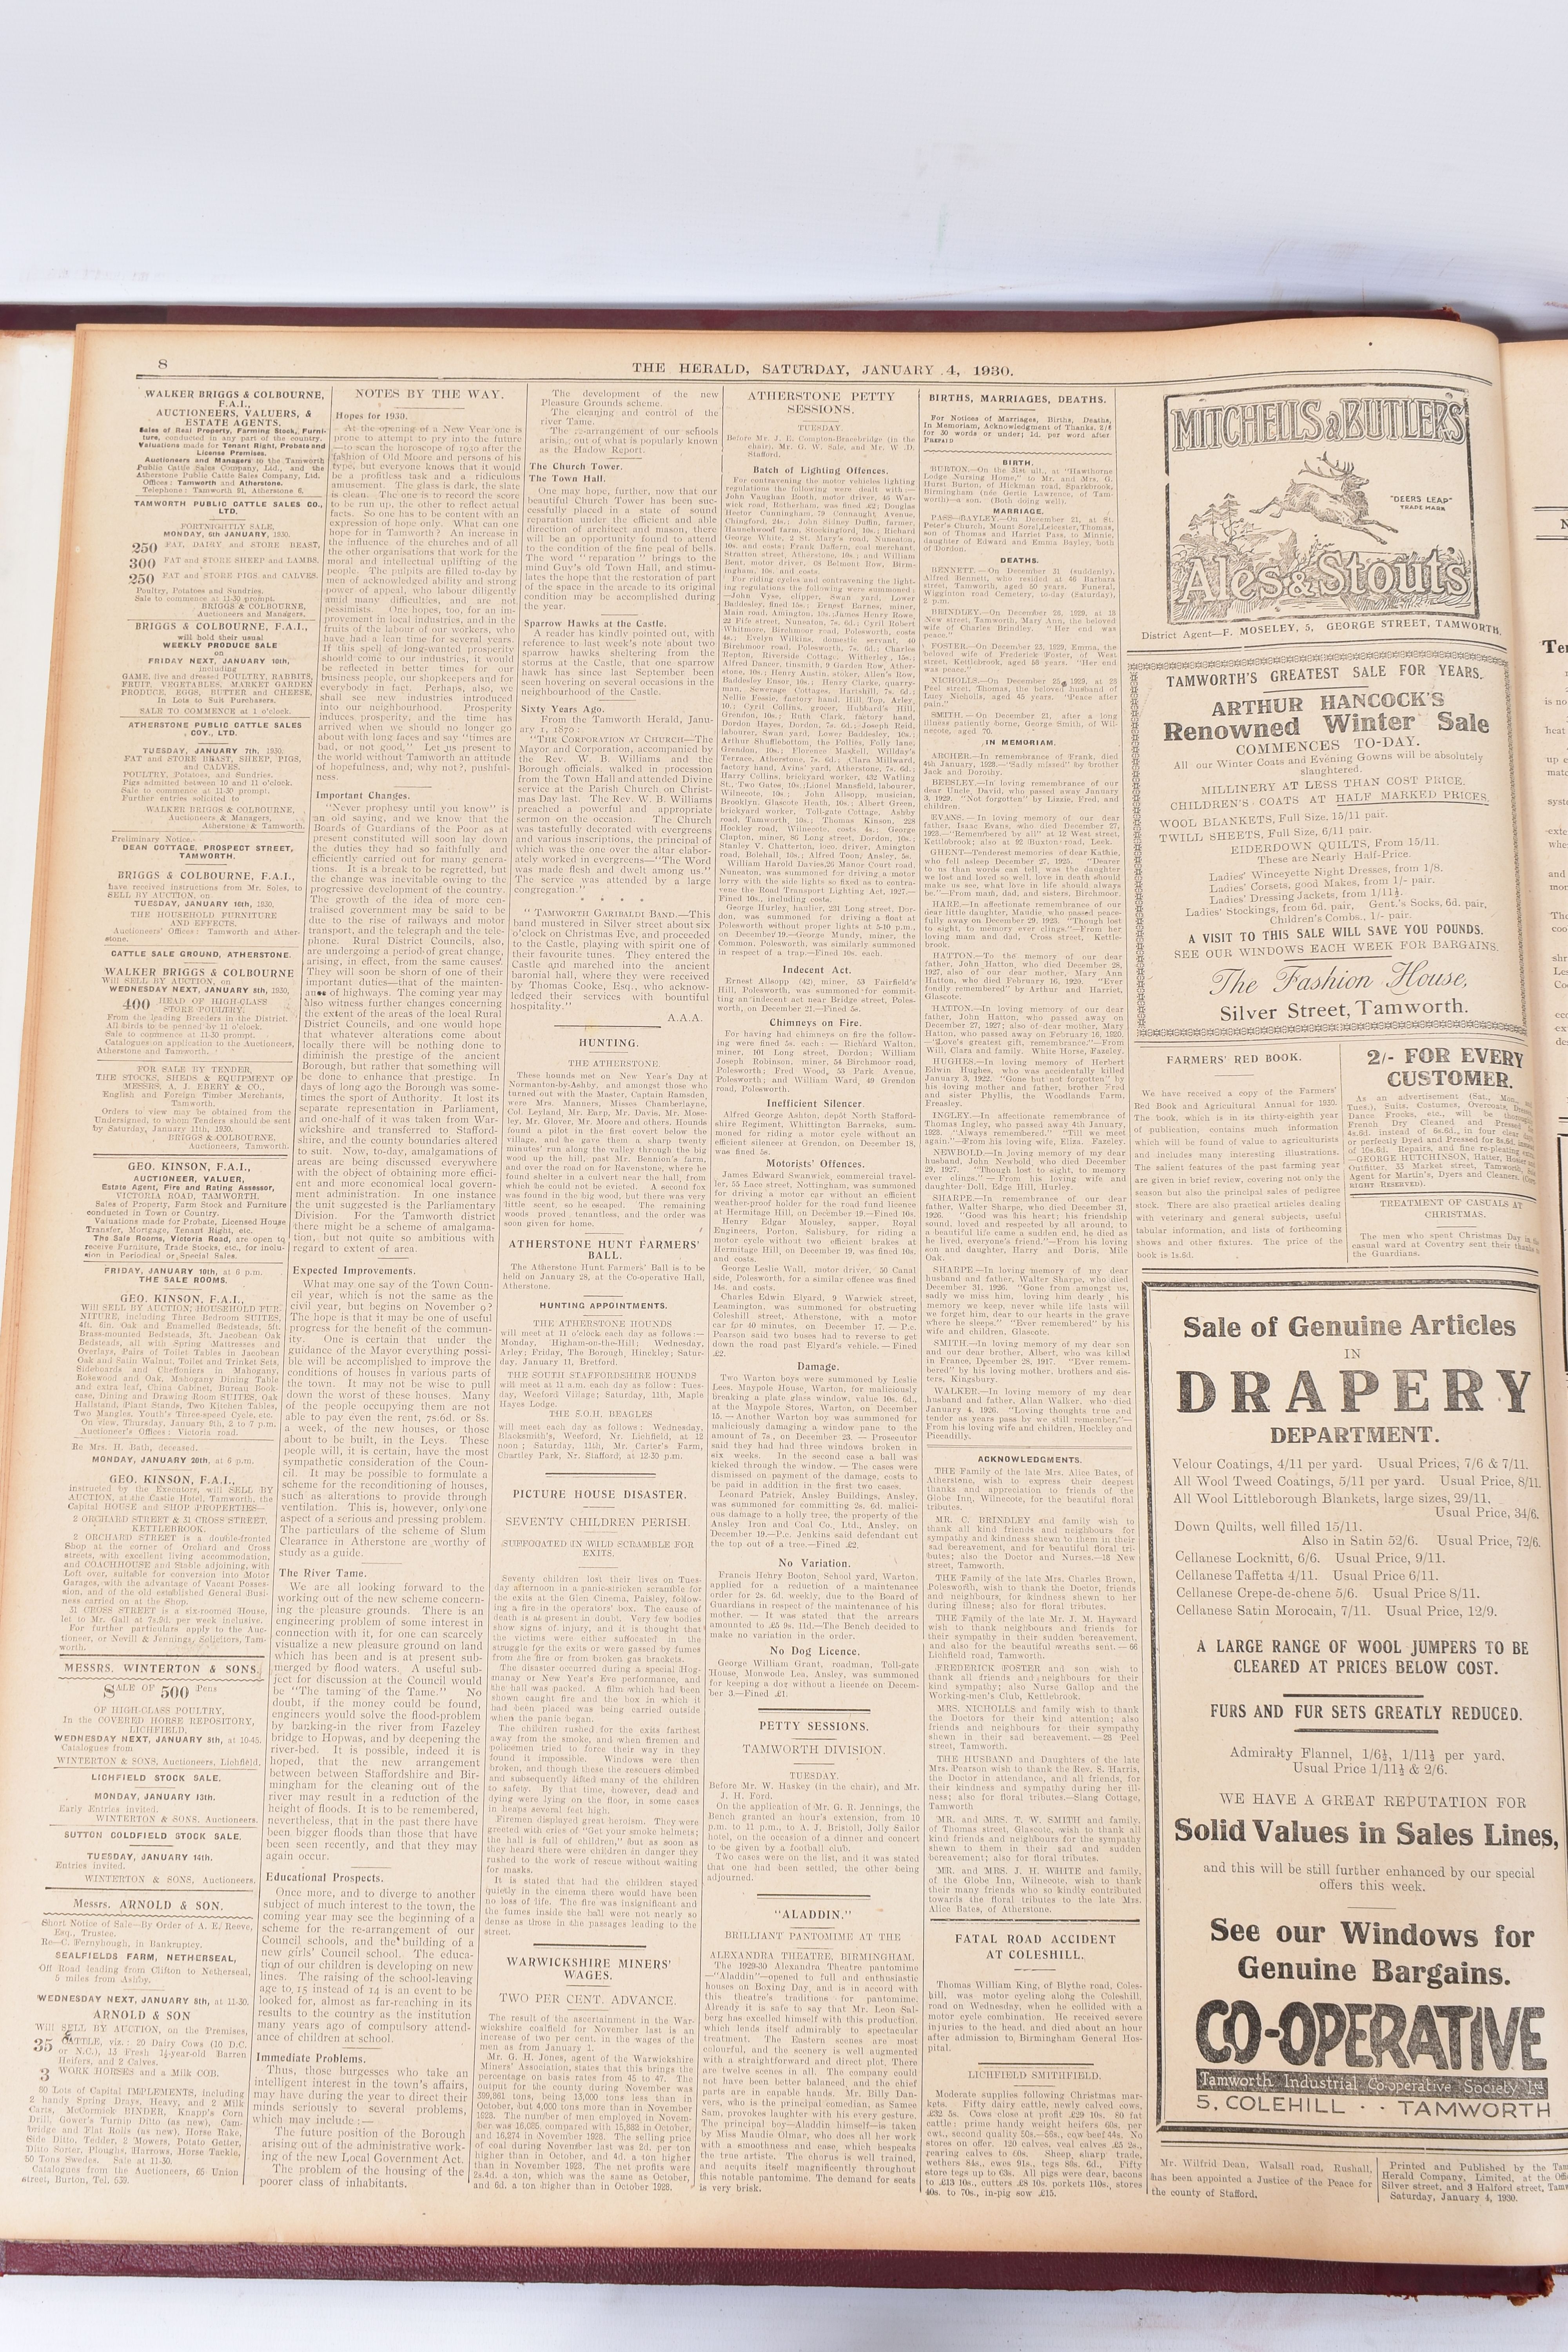 THE TAMWORTH HERALD, an Archive of the Tamworth Herald Newspaper from 1930, the newspapers are bound - Image 4 of 11